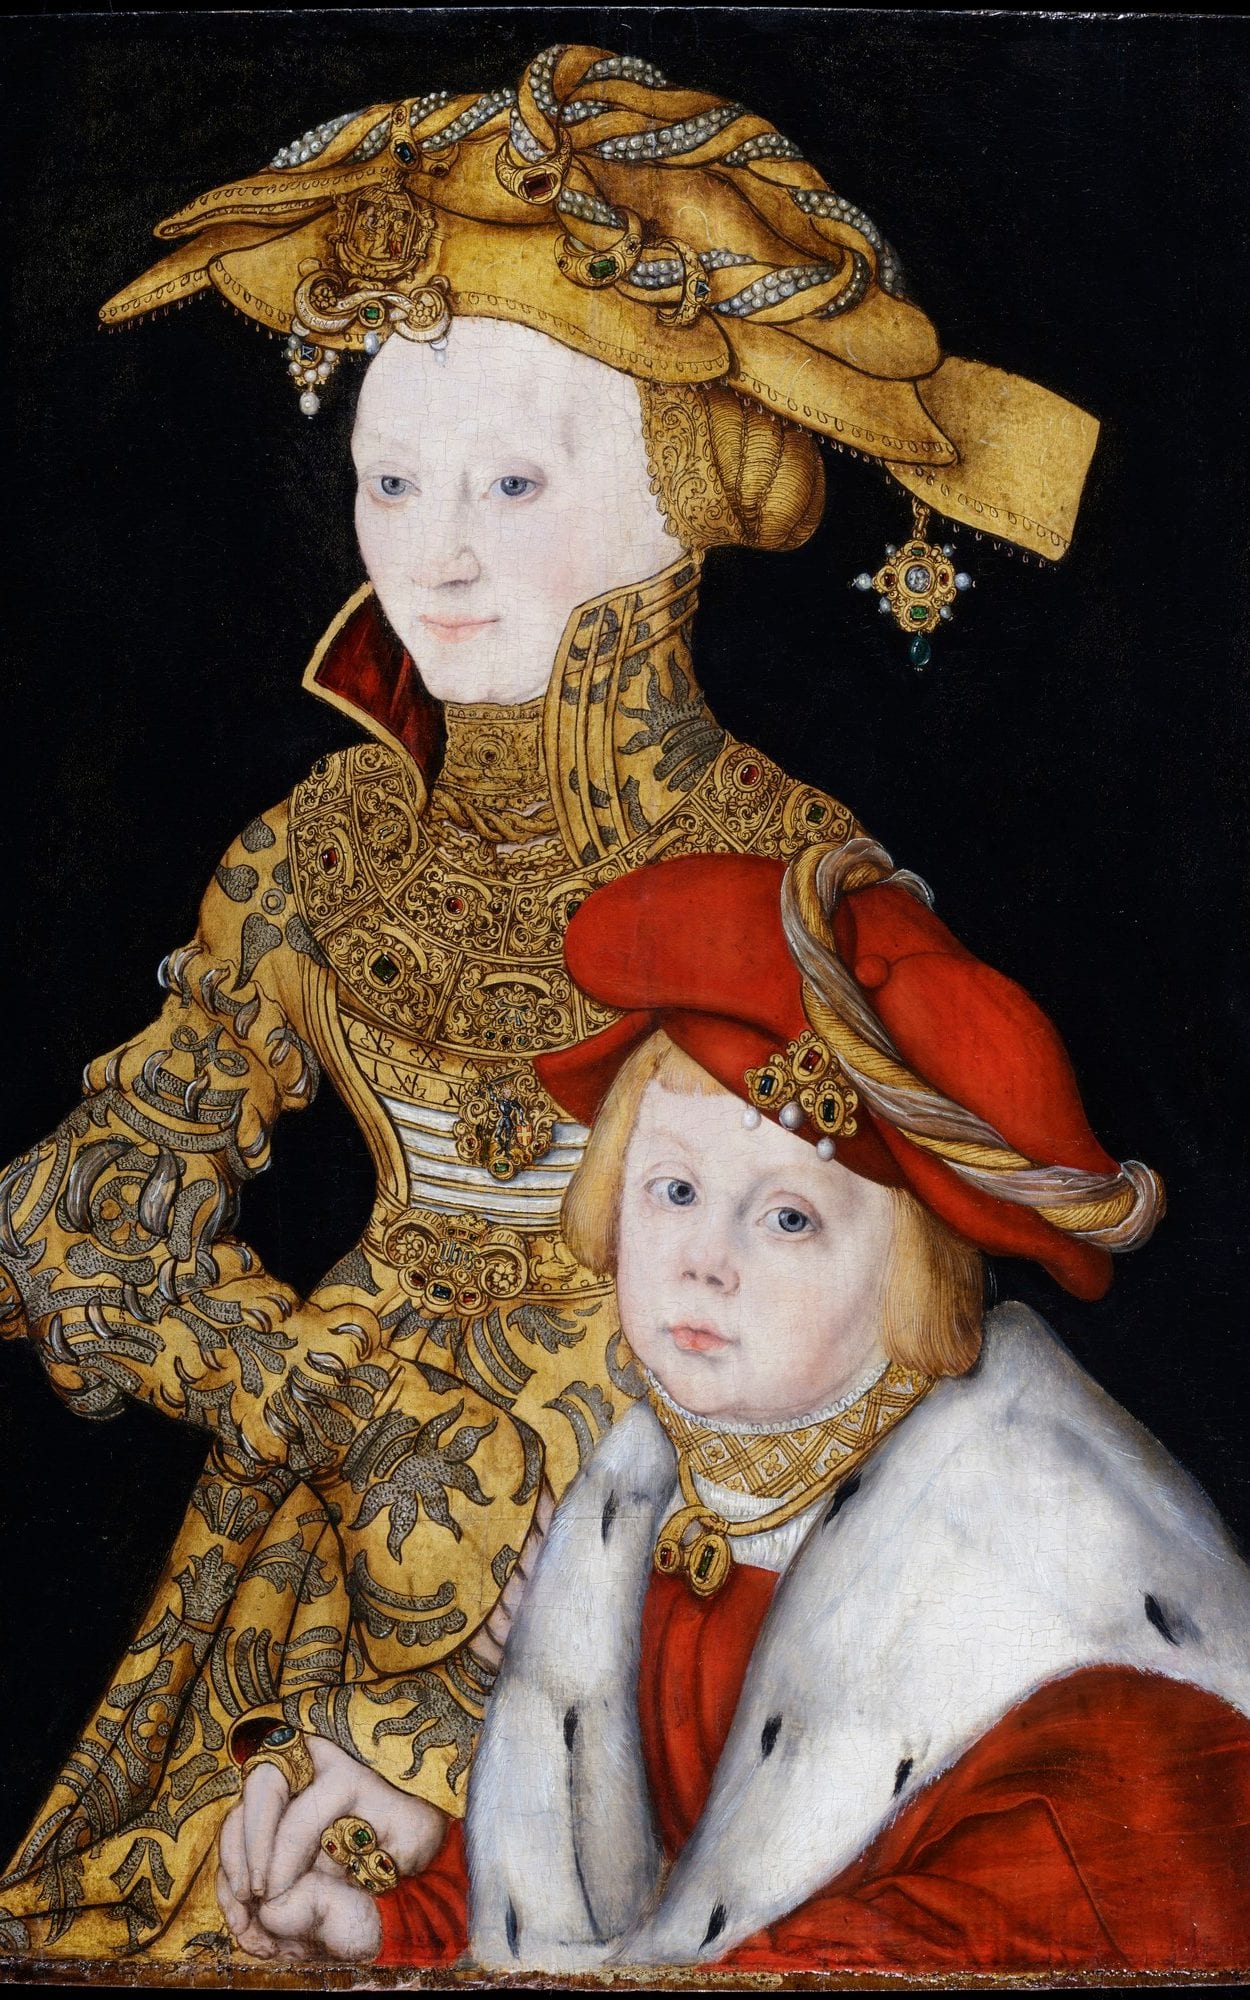 prince and son depicted by portrait painter